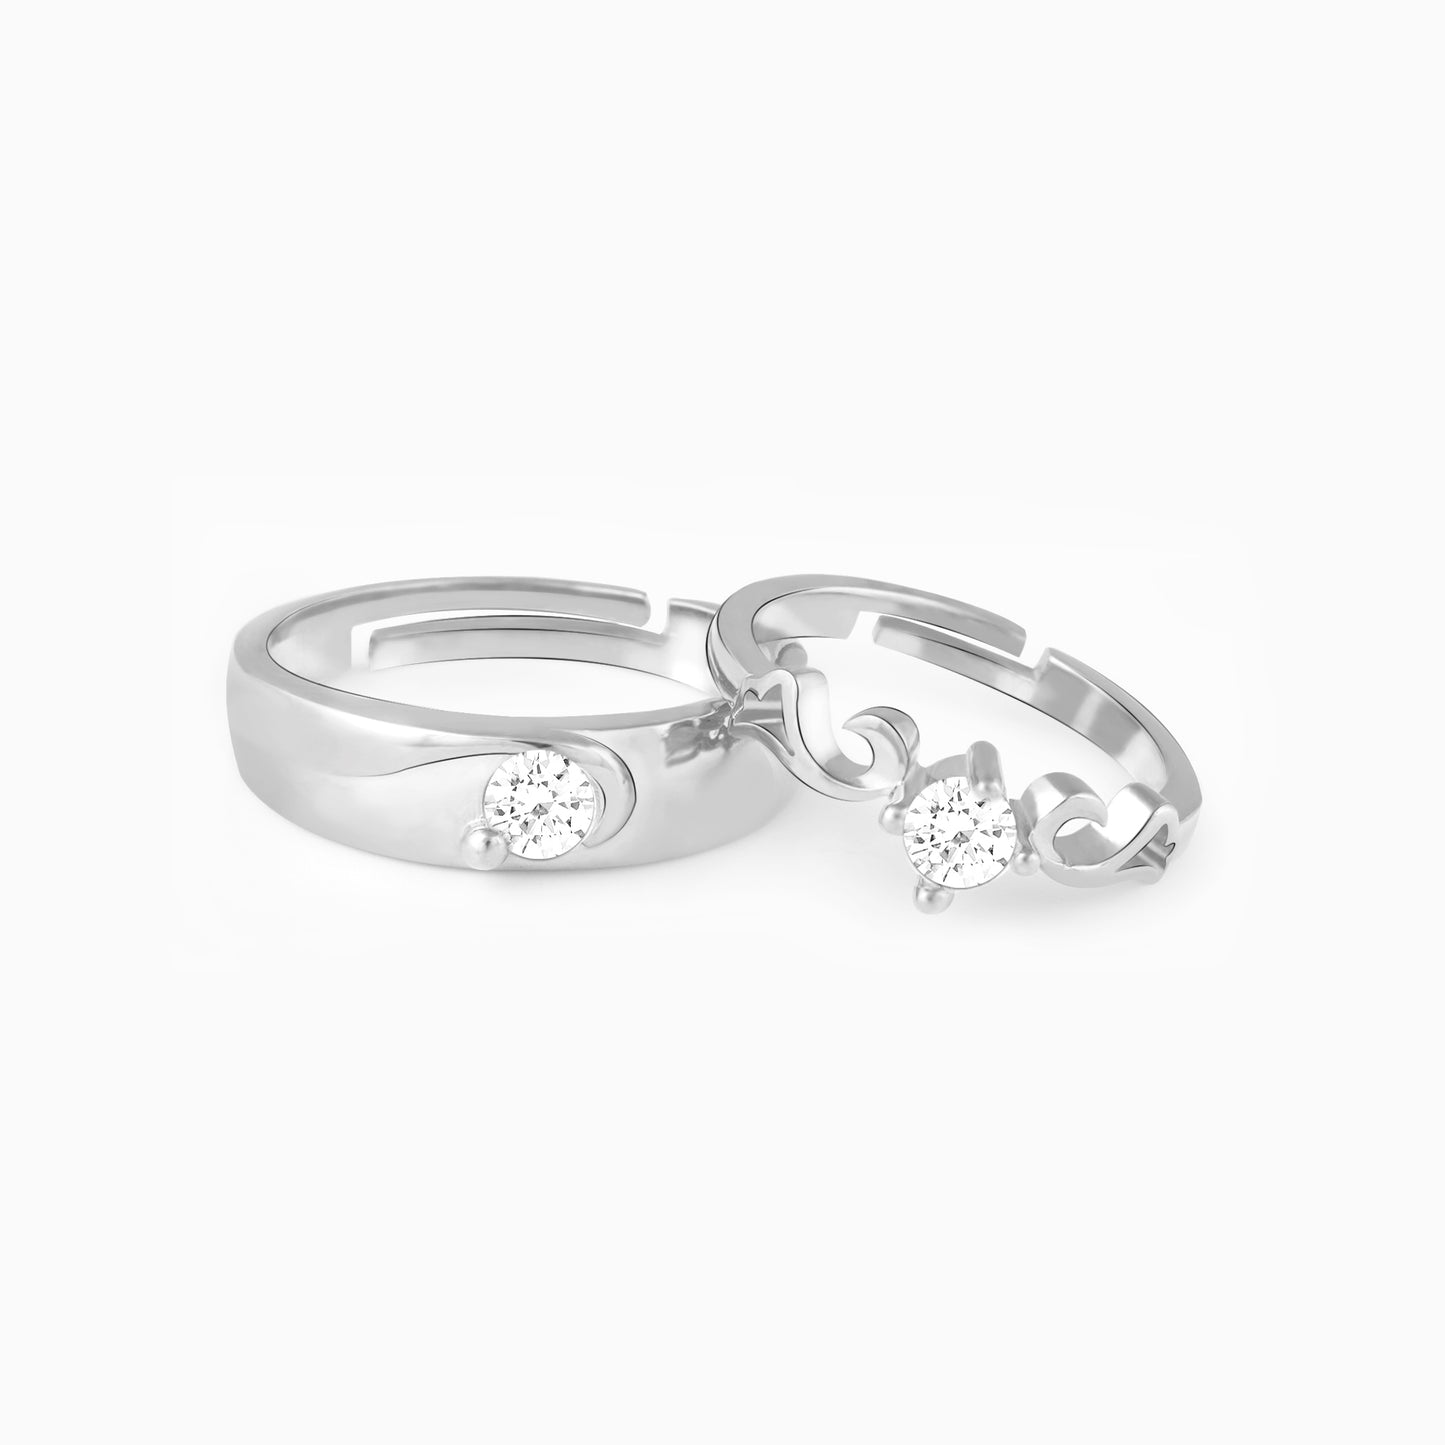 Silver Glowing in Love Couple Rings